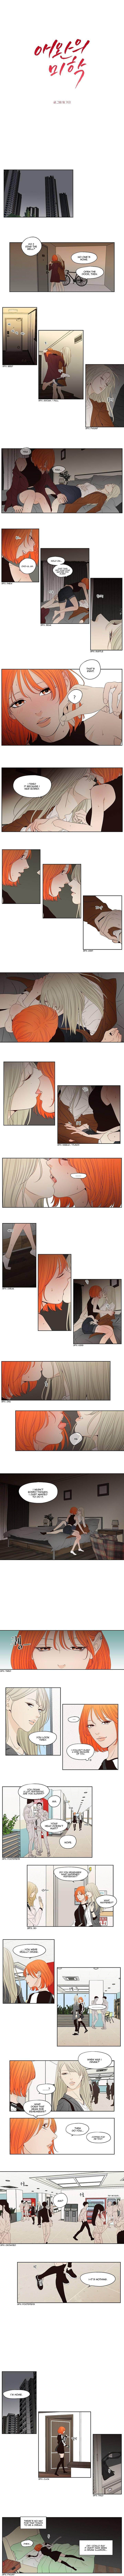 Pet’s Aesthetics - Chapter 5 Page 1